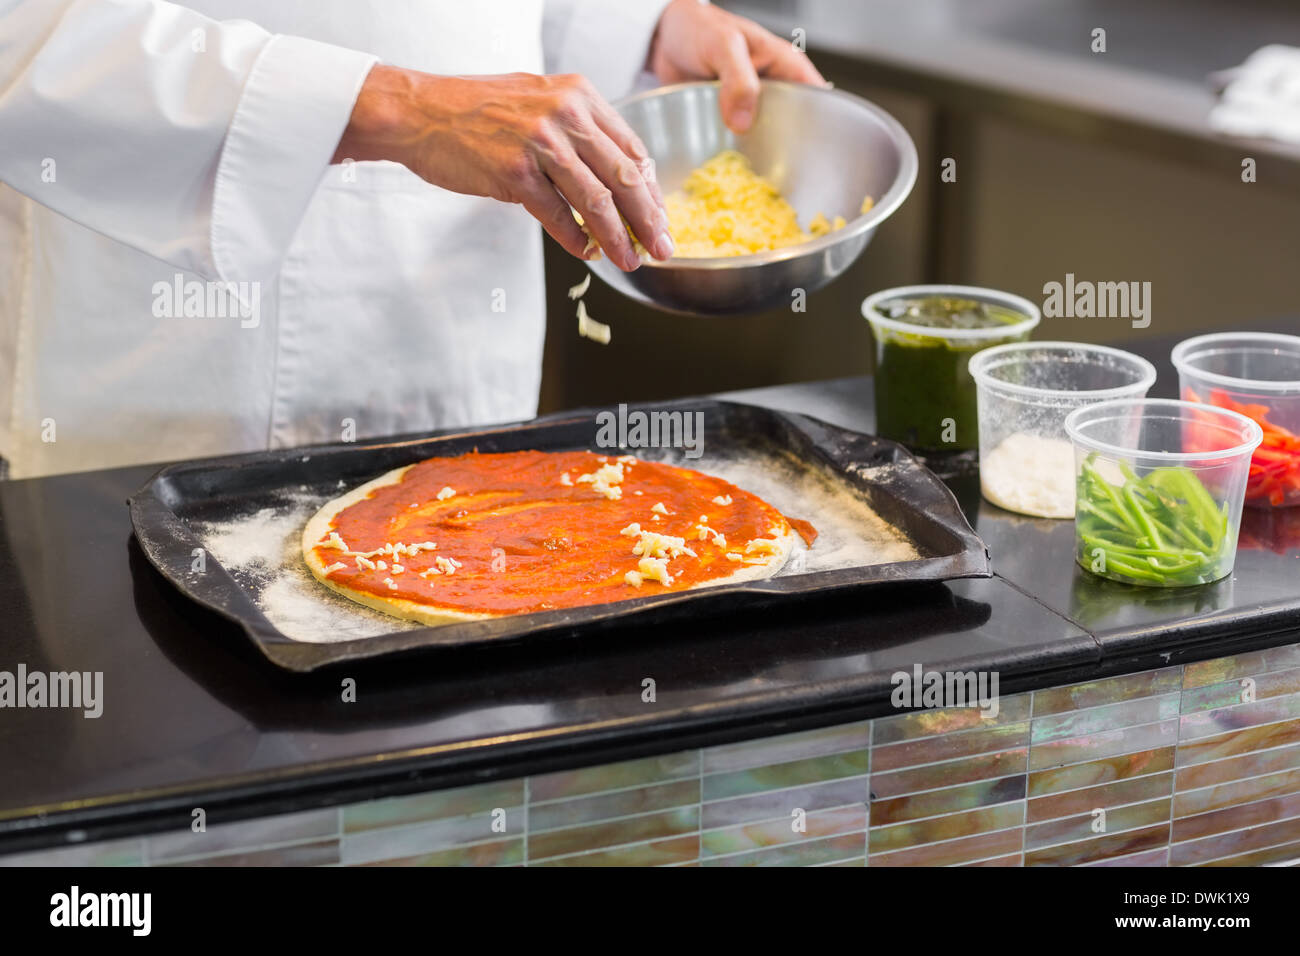 Mid section of a chef garnishing food in kitchen Stock Photo